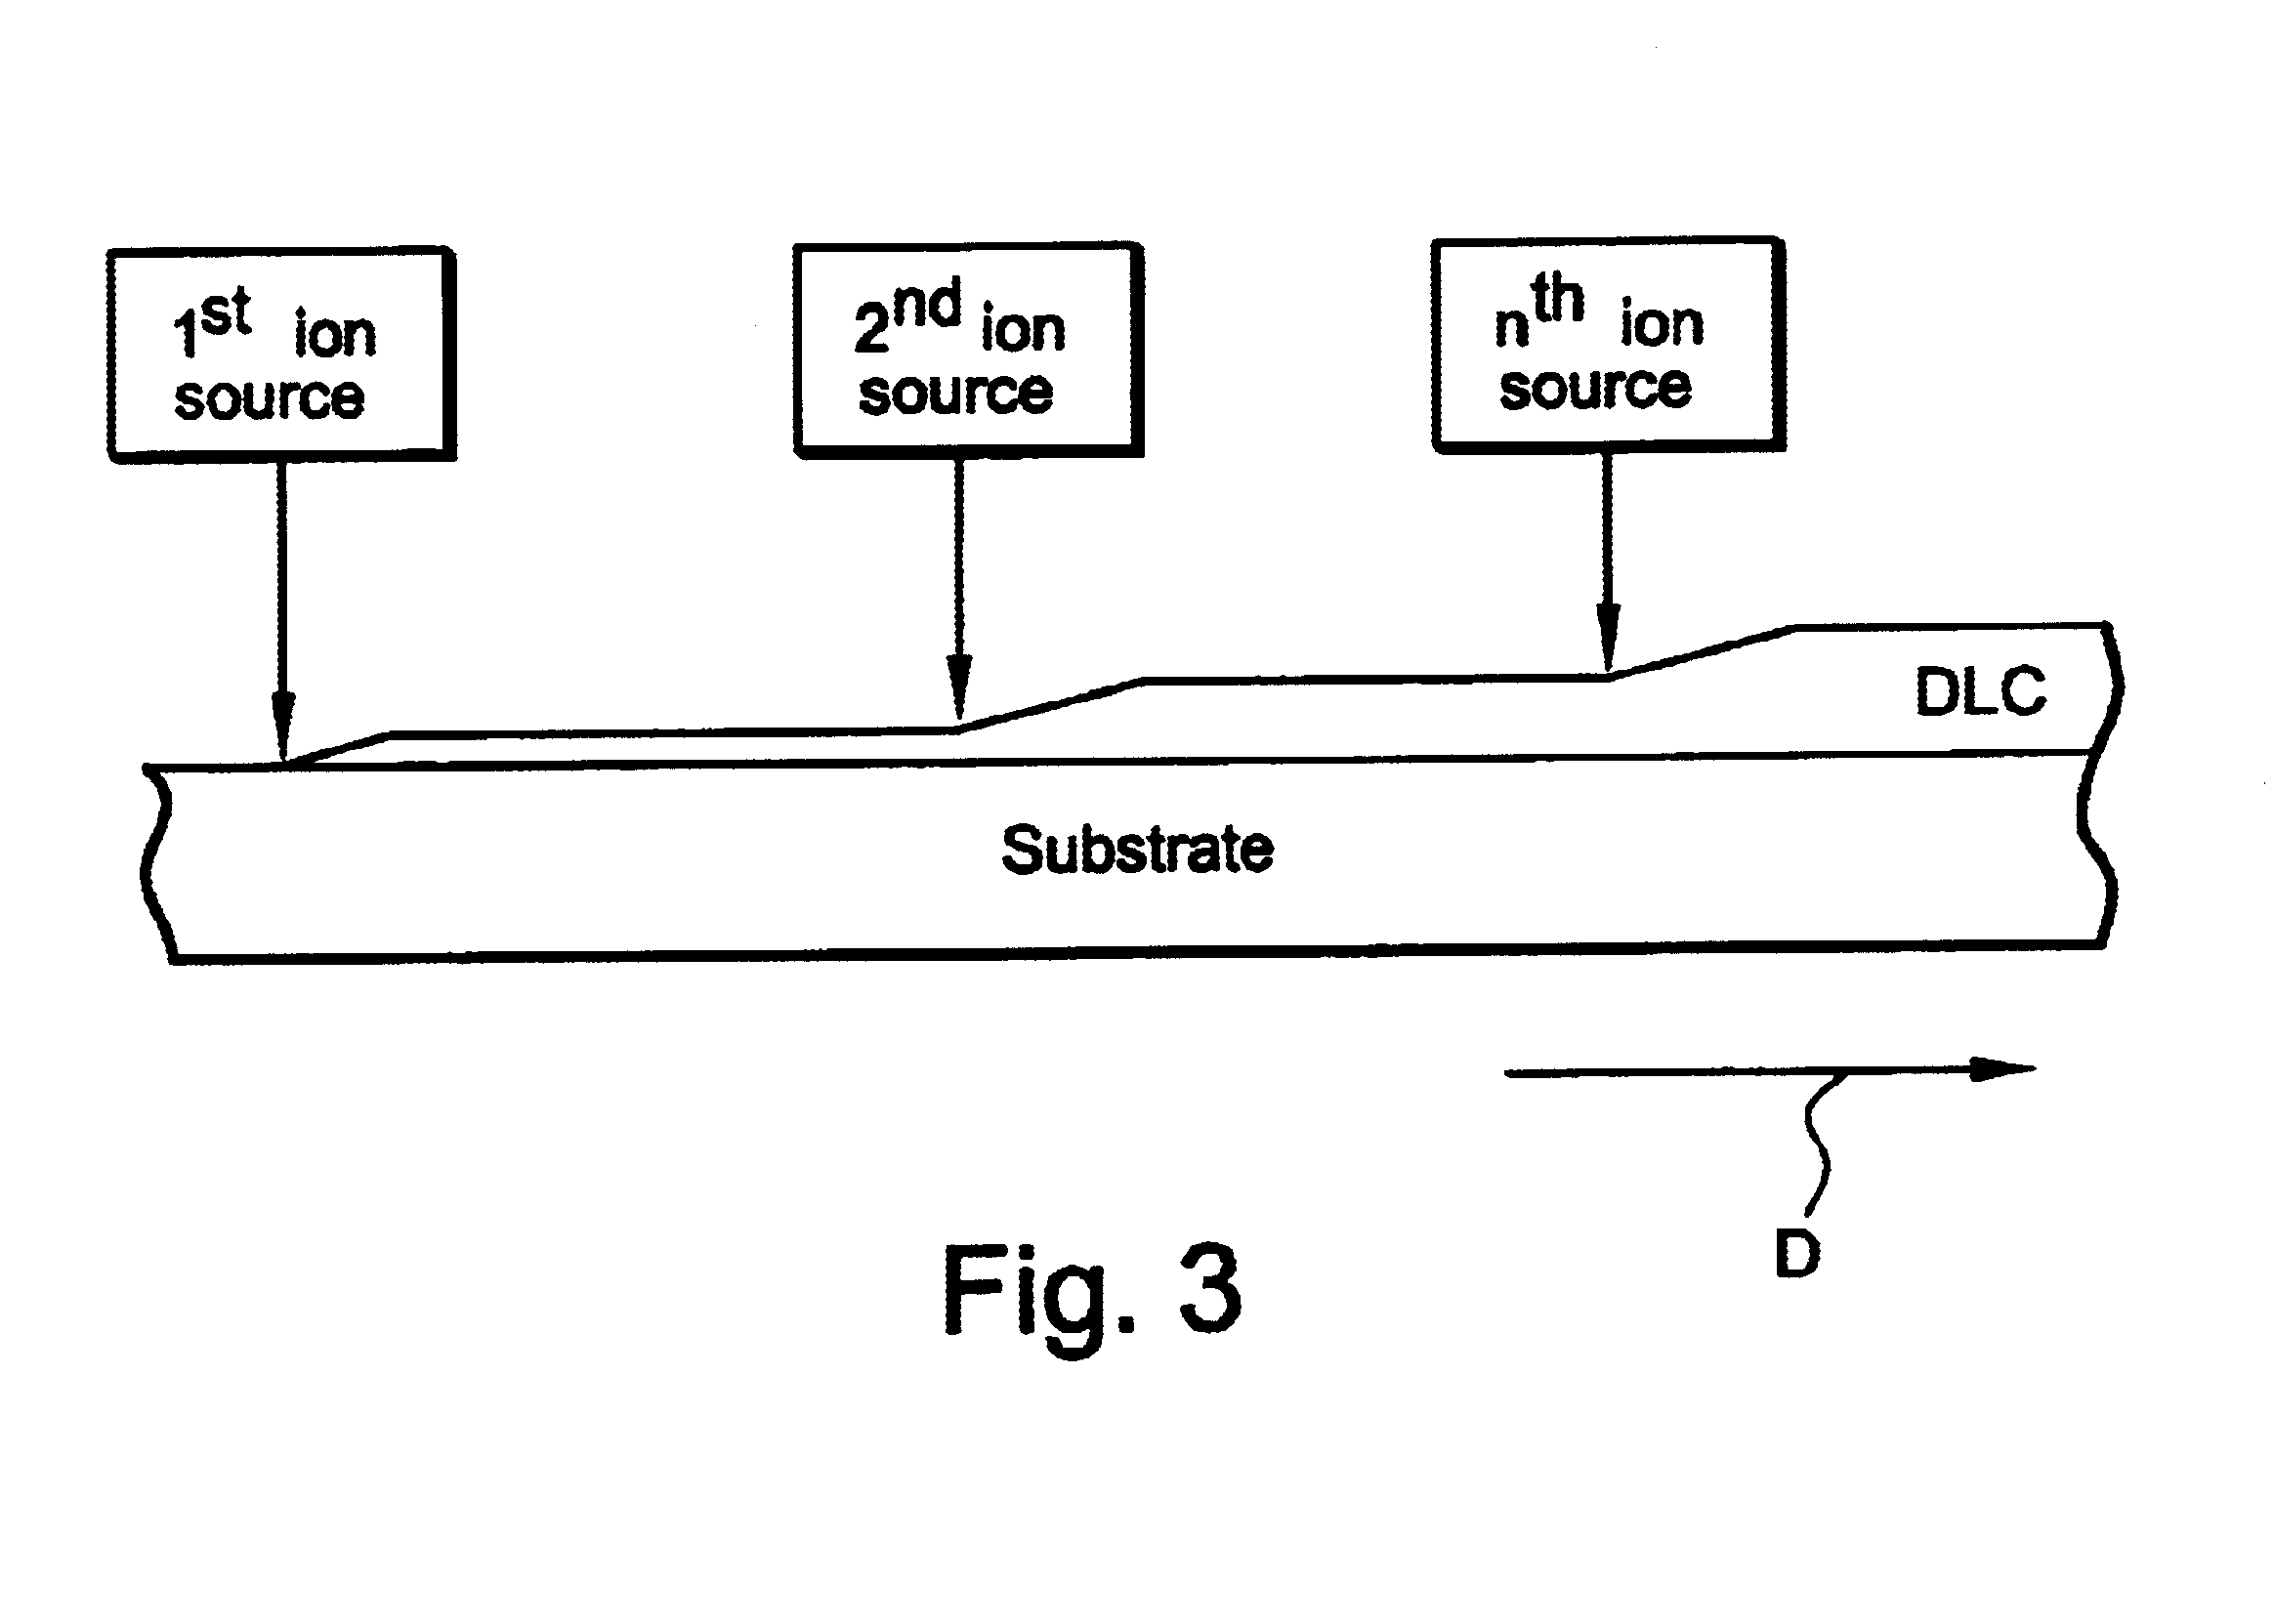 Method of depositing DLC on substrate